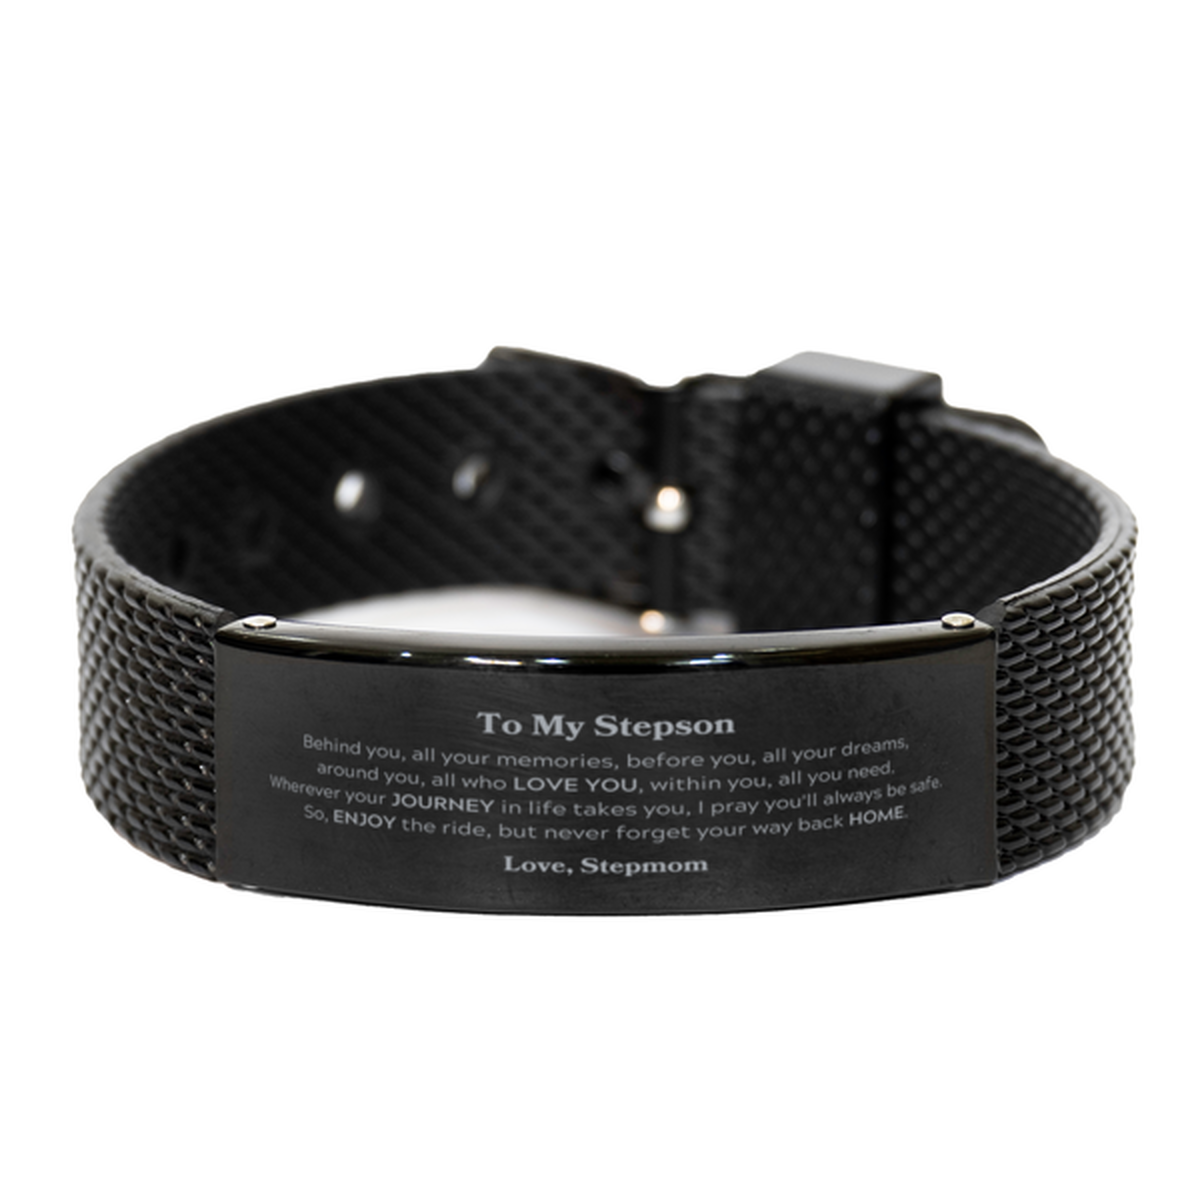 To My Stepson Graduation Gifts from Stepmom, Stepson Black Shark Mesh Bracelet Christmas Birthday Gifts for Stepson Behind you, all your memories, before you, all your dreams. Love, Stepmom